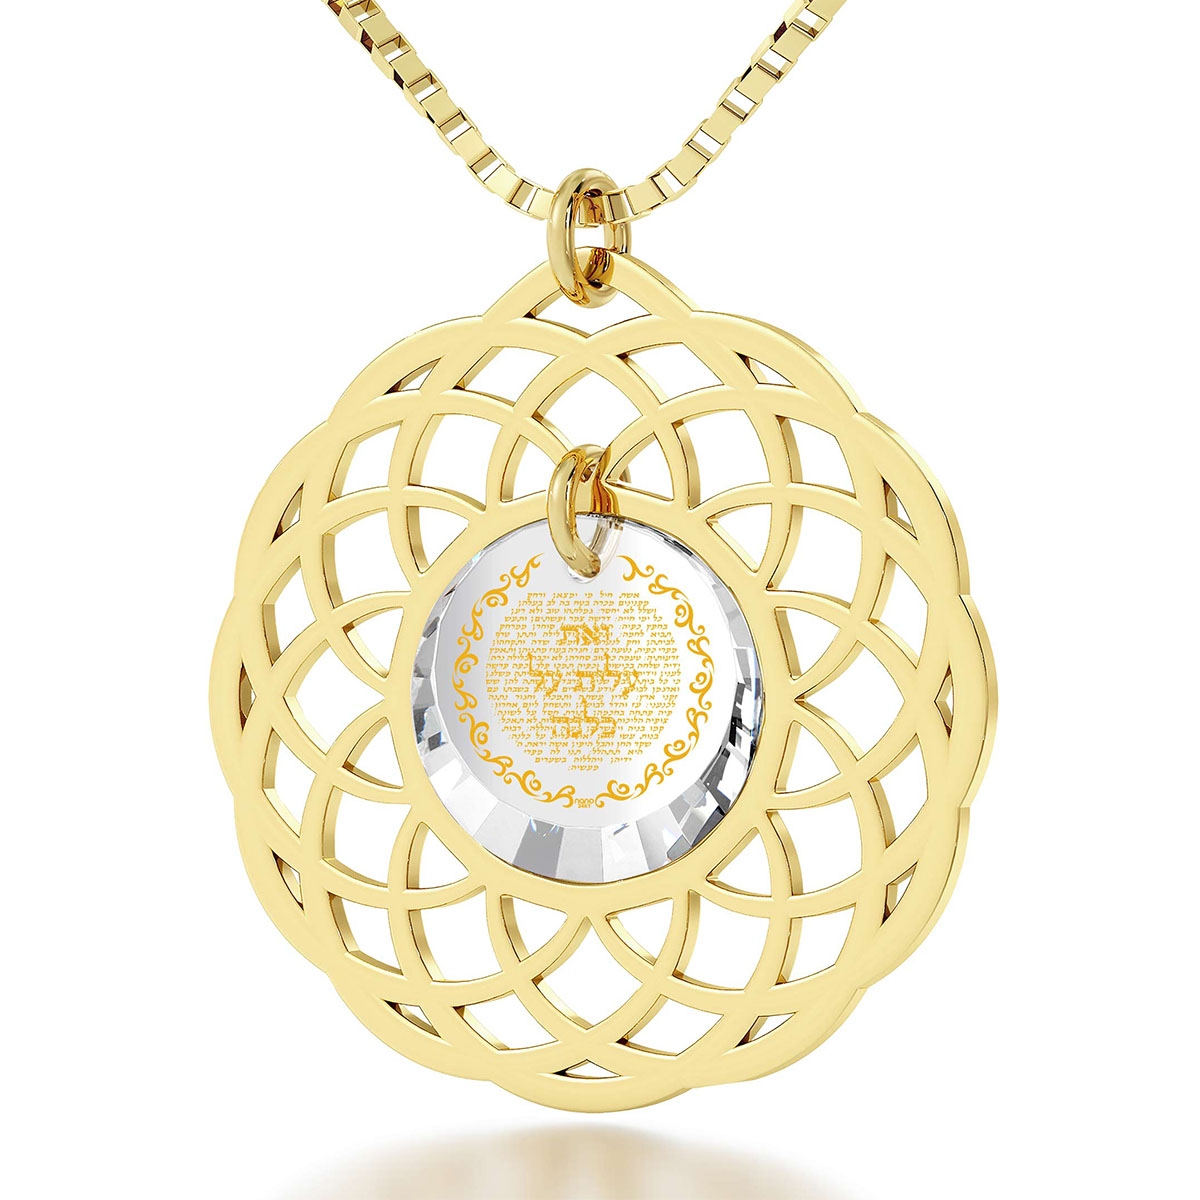 24K Gold-Plated Silver and Cubic Zirconia Eishet Chayil (Woman of Valor) Necklace Micro-Inscribed With 24K Gold (Proverbs 31:10-31) - 1